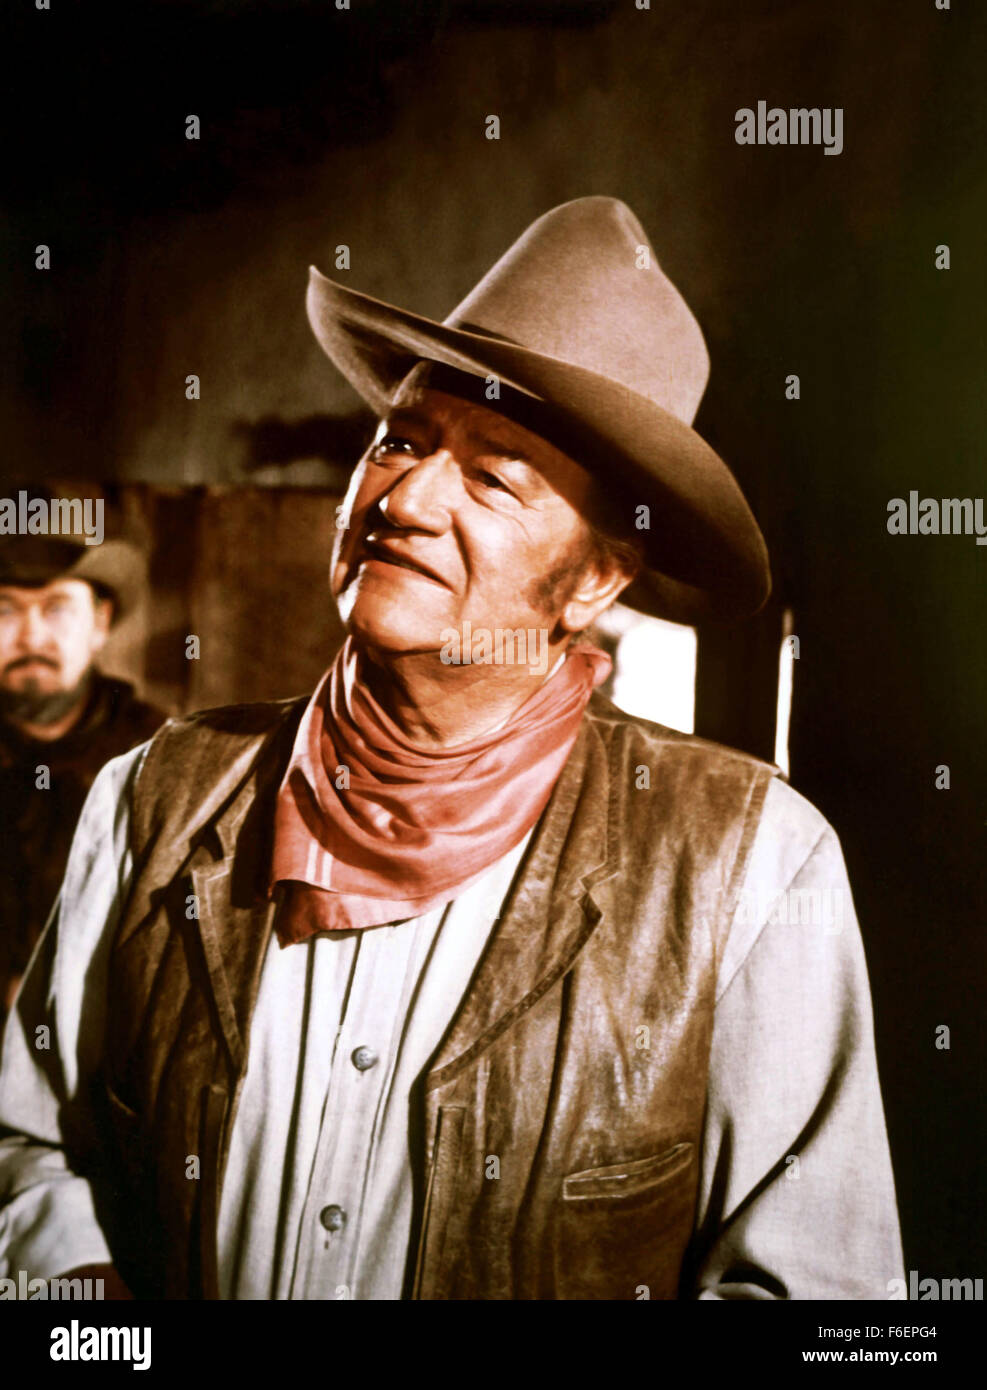 Jan. 1, 1969 - ......The iconic cowboy hat that John Wayne wore in six major western films has sold at auction for GBP 23,000.....The felt accessory was worn by the actor in 'The Comancheros', 'McClintock', 'The Sons of Katie Elder', 'El Dorado', and 'The Undefeated.'....He gave it to his stunt double Chuck Roberson, with whom he worked with for more than 30 years.....The inner rim of the hat is marked with his name handwritten in black pen, and the underside of the lip says 'John Wayne Comancheros'.....The hat was sold by Nate D. Sanders Auctions in Los Angeles and was snapped up for 7,000... Stock Photo